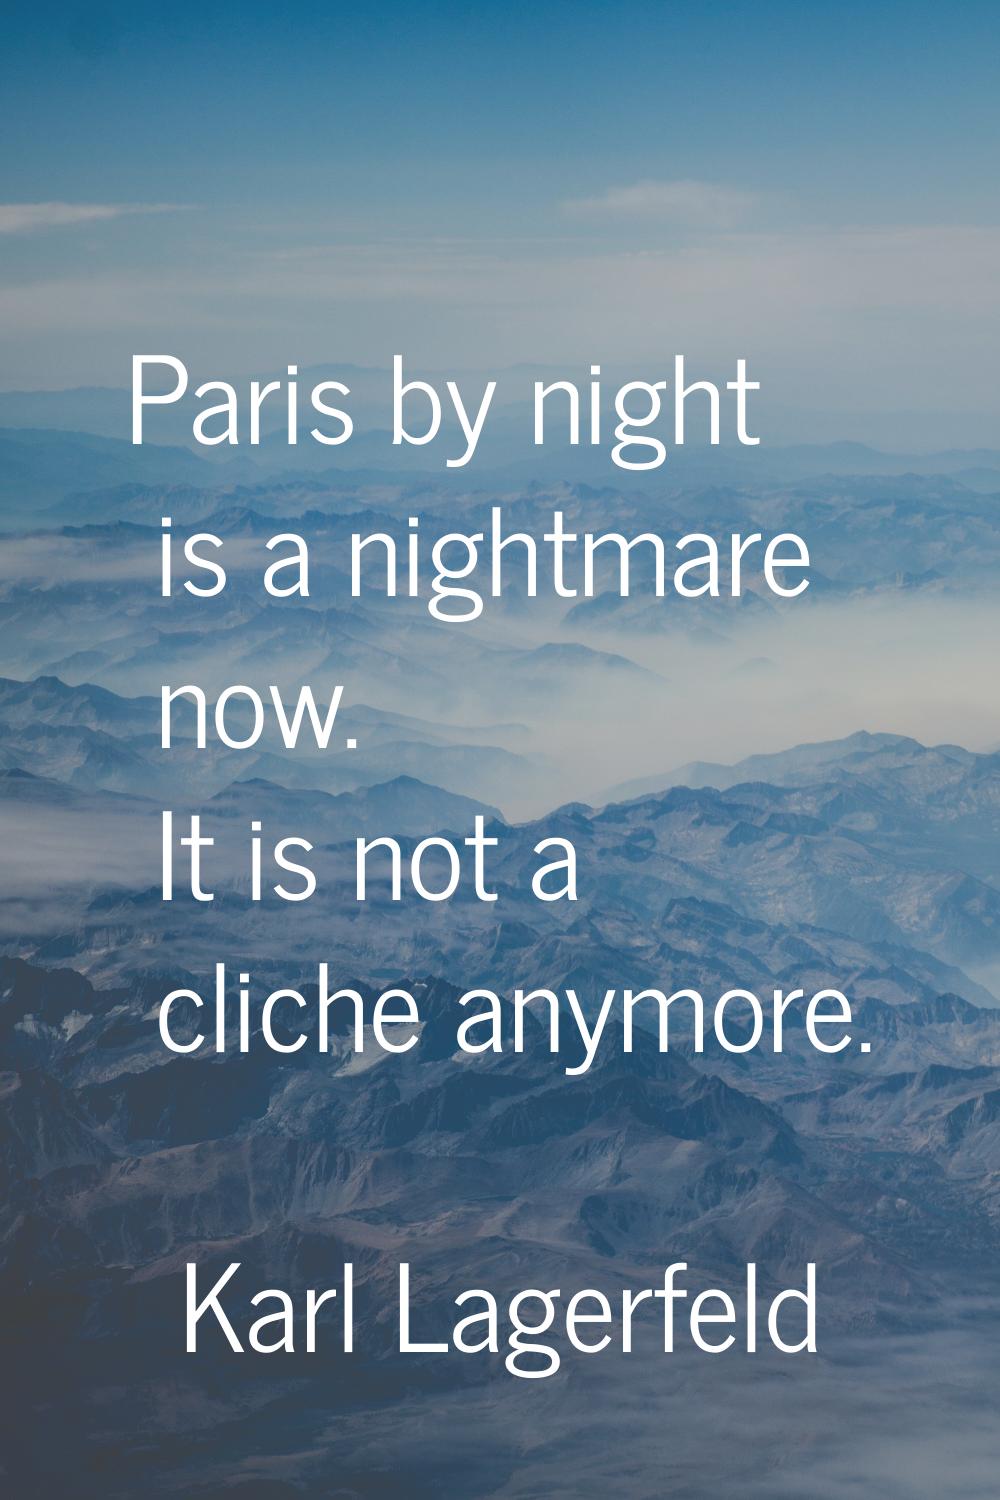 Paris by night is a nightmare now. It is not a cliche anymore.